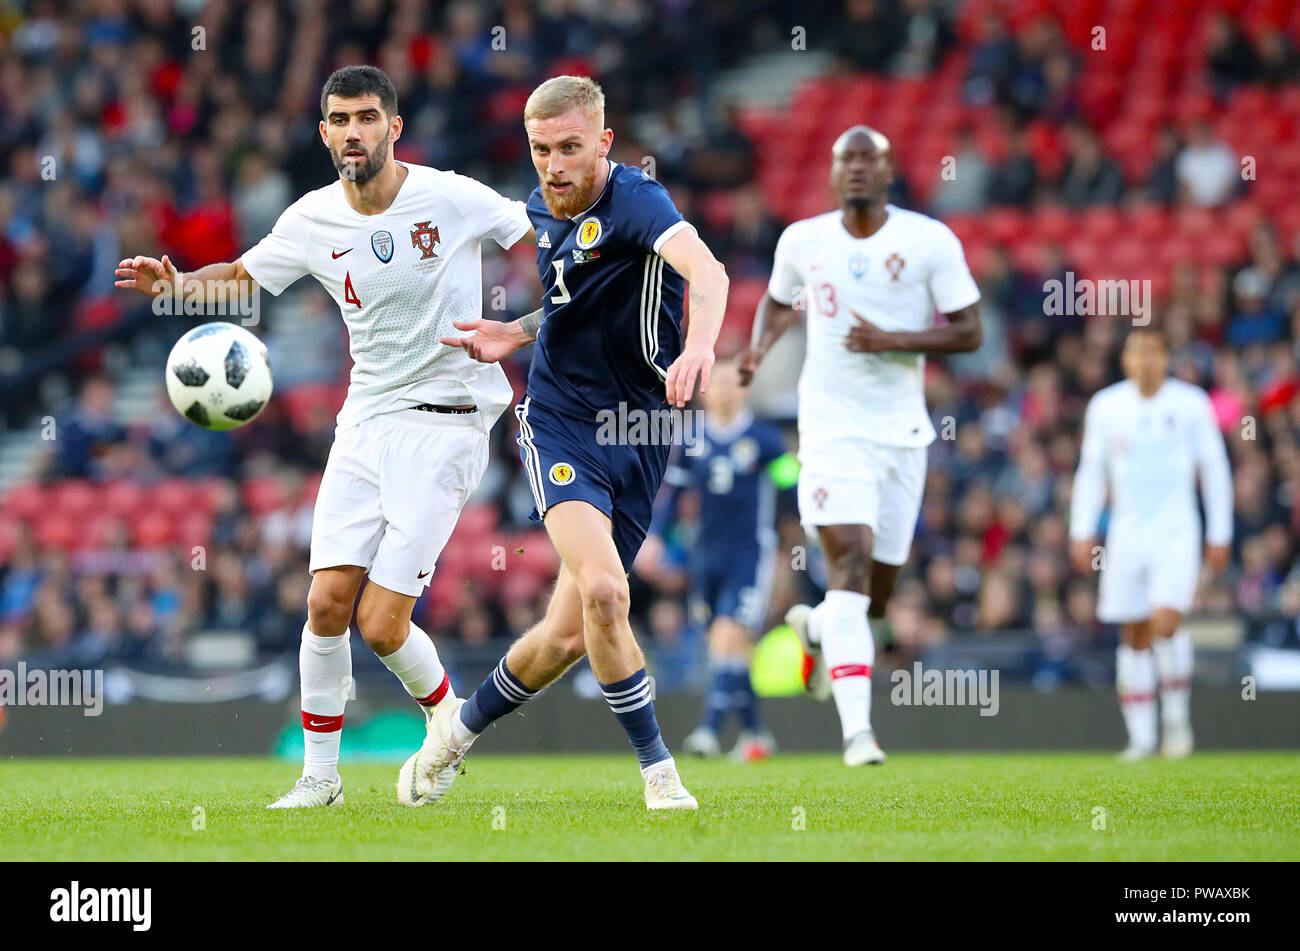 Portugal's Luis Neto (left) and Scotland's Oli McBurnie battle for the ball during the International Friendly match at Hampden Park, Glasgow. Stock Photo